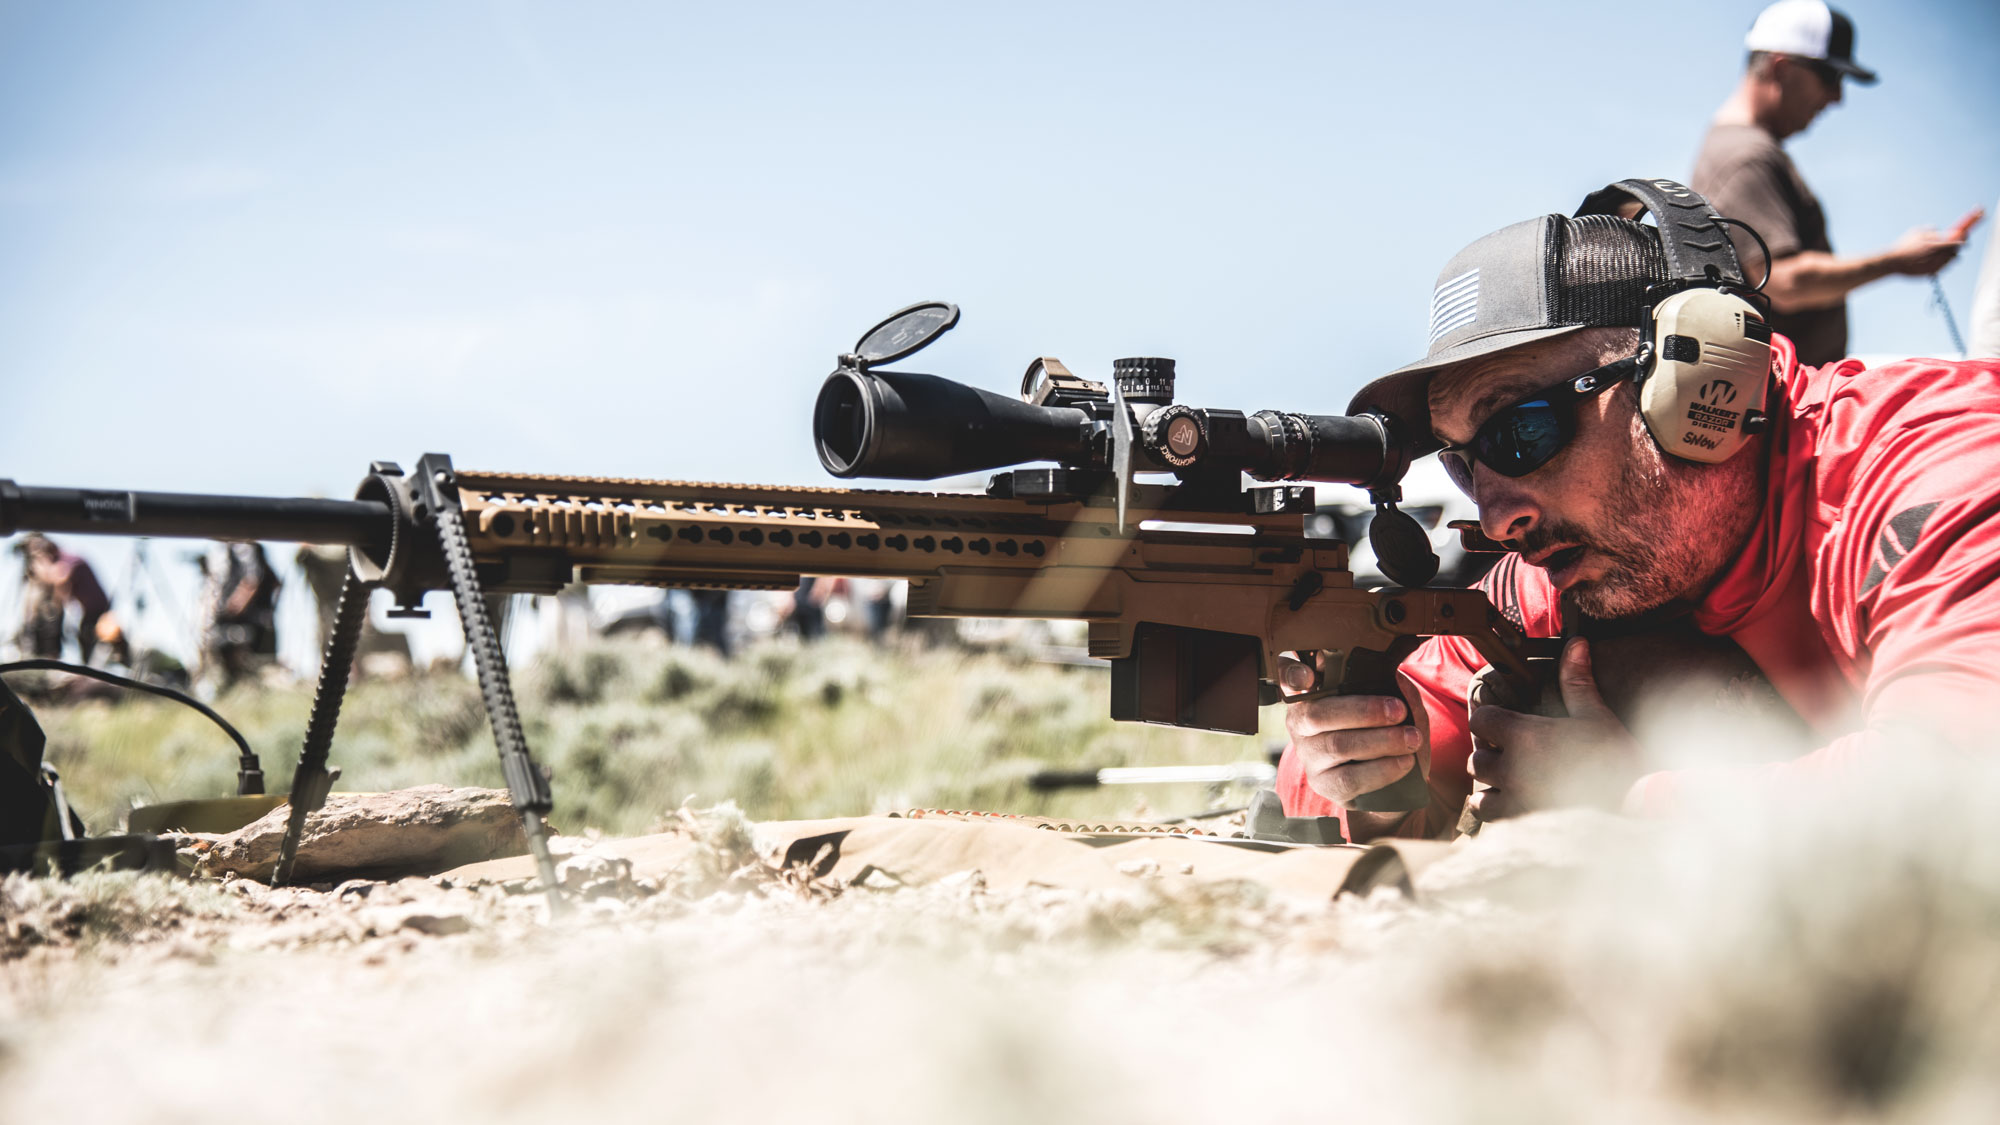 Sniper training hits the mark, Article